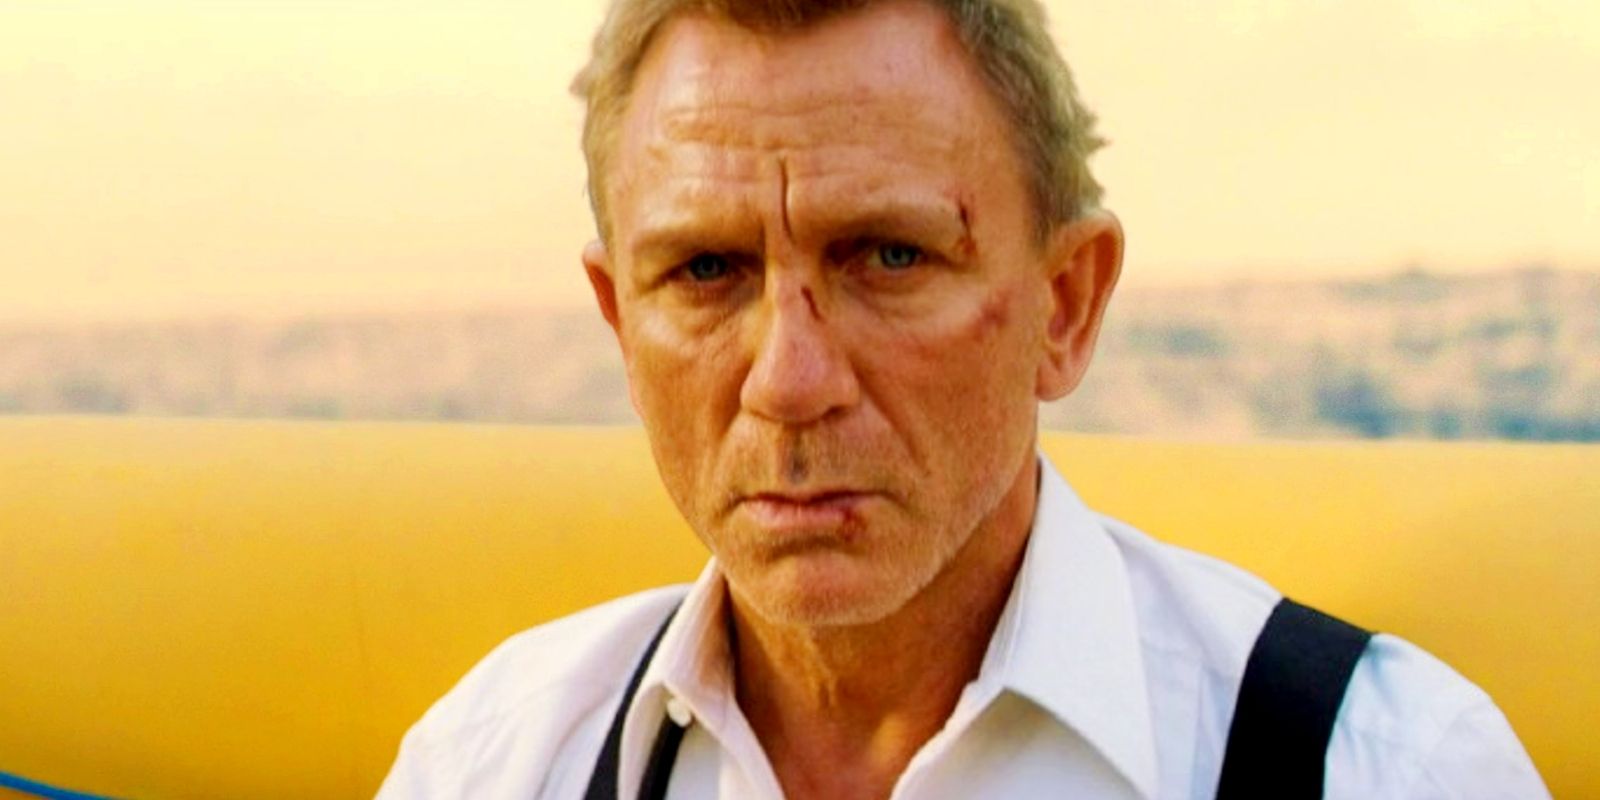 Daniel Craig as James Bond in an inflatable yellow raft in No Time To Die